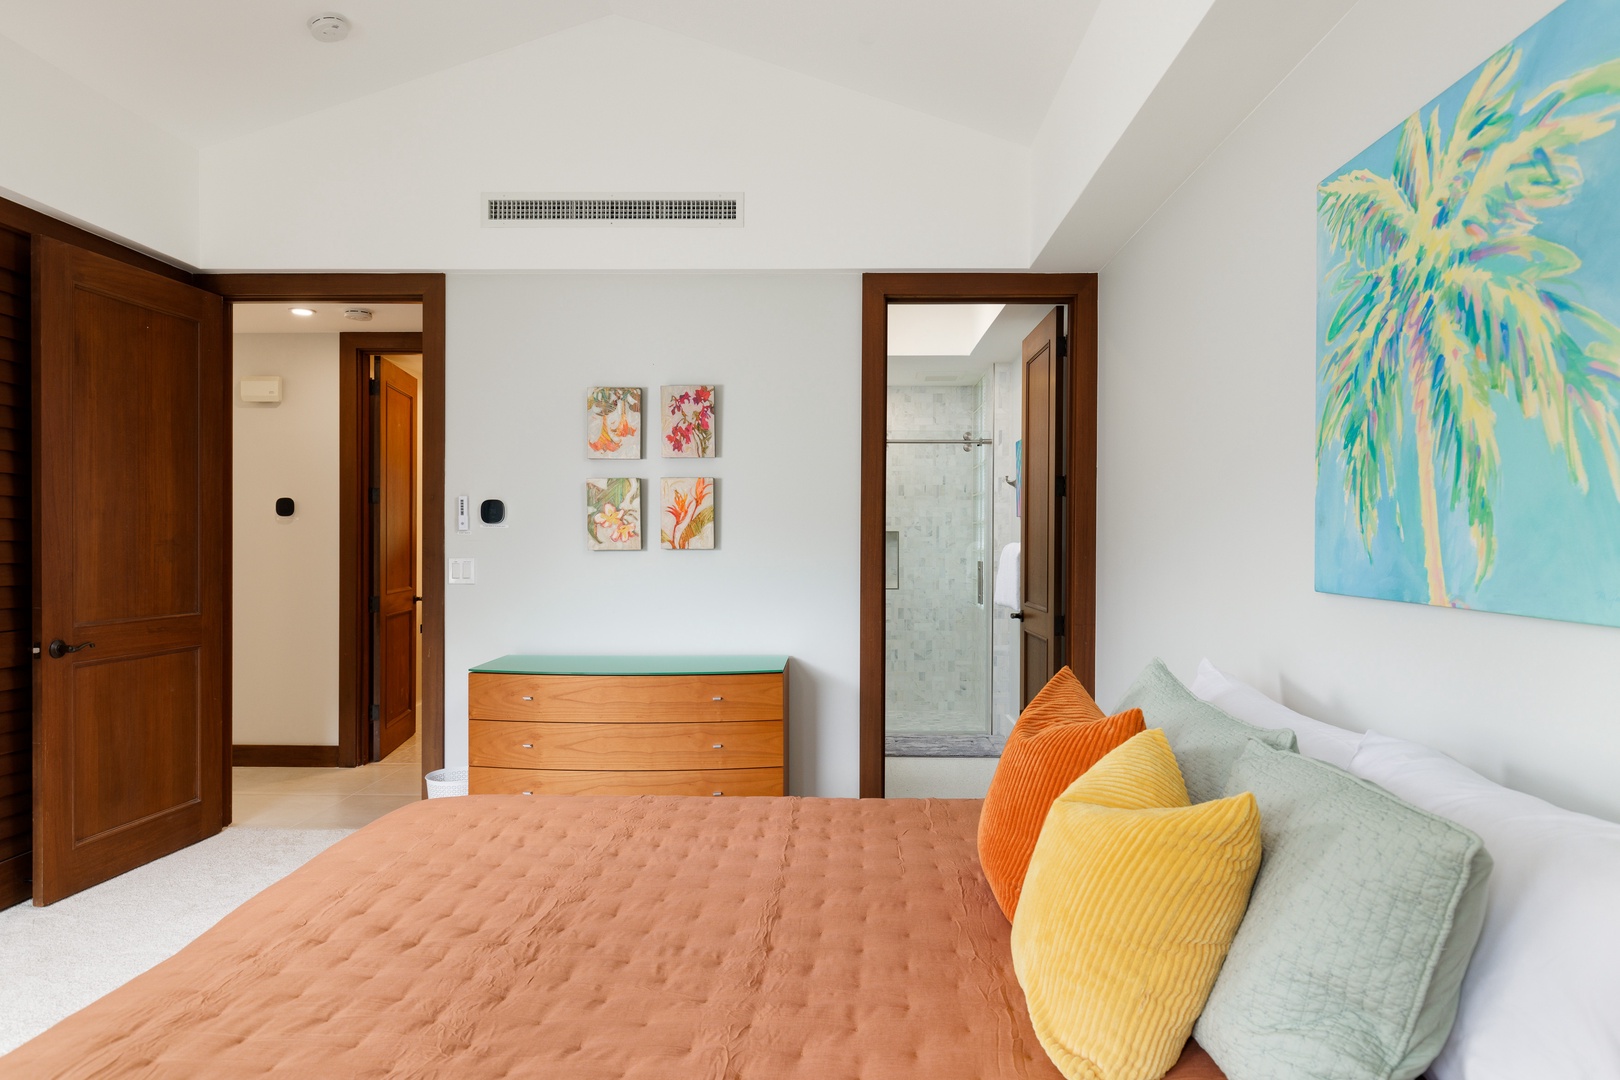 Kailua Kona Vacation Rentals, Fairway Villa 104A - Outmost comfort for your private retreat, a room perfect for the little ones, with a cozy and plush beds.